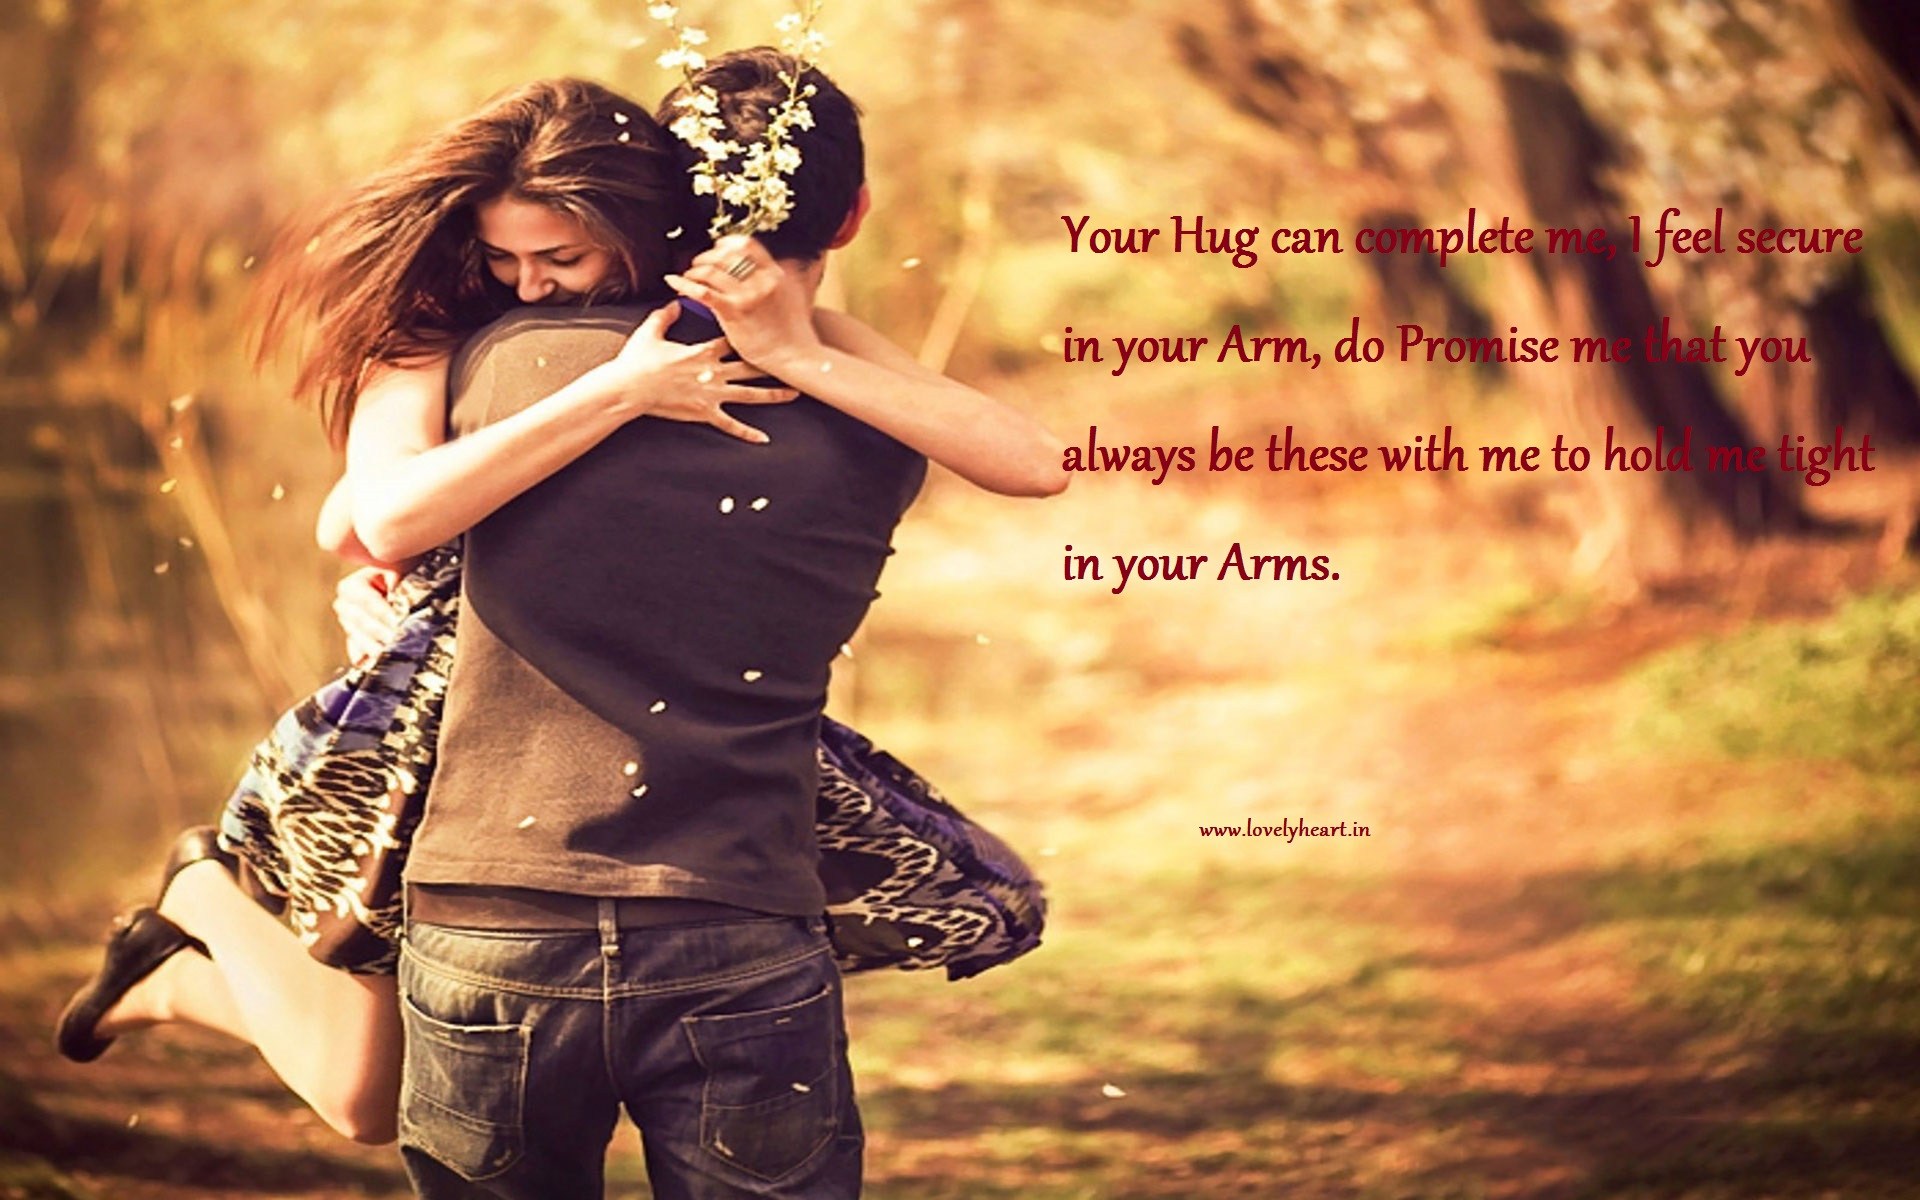 Promise With Hug Pics Kiss Day Romantic Wallpaper Image Hot Sexy